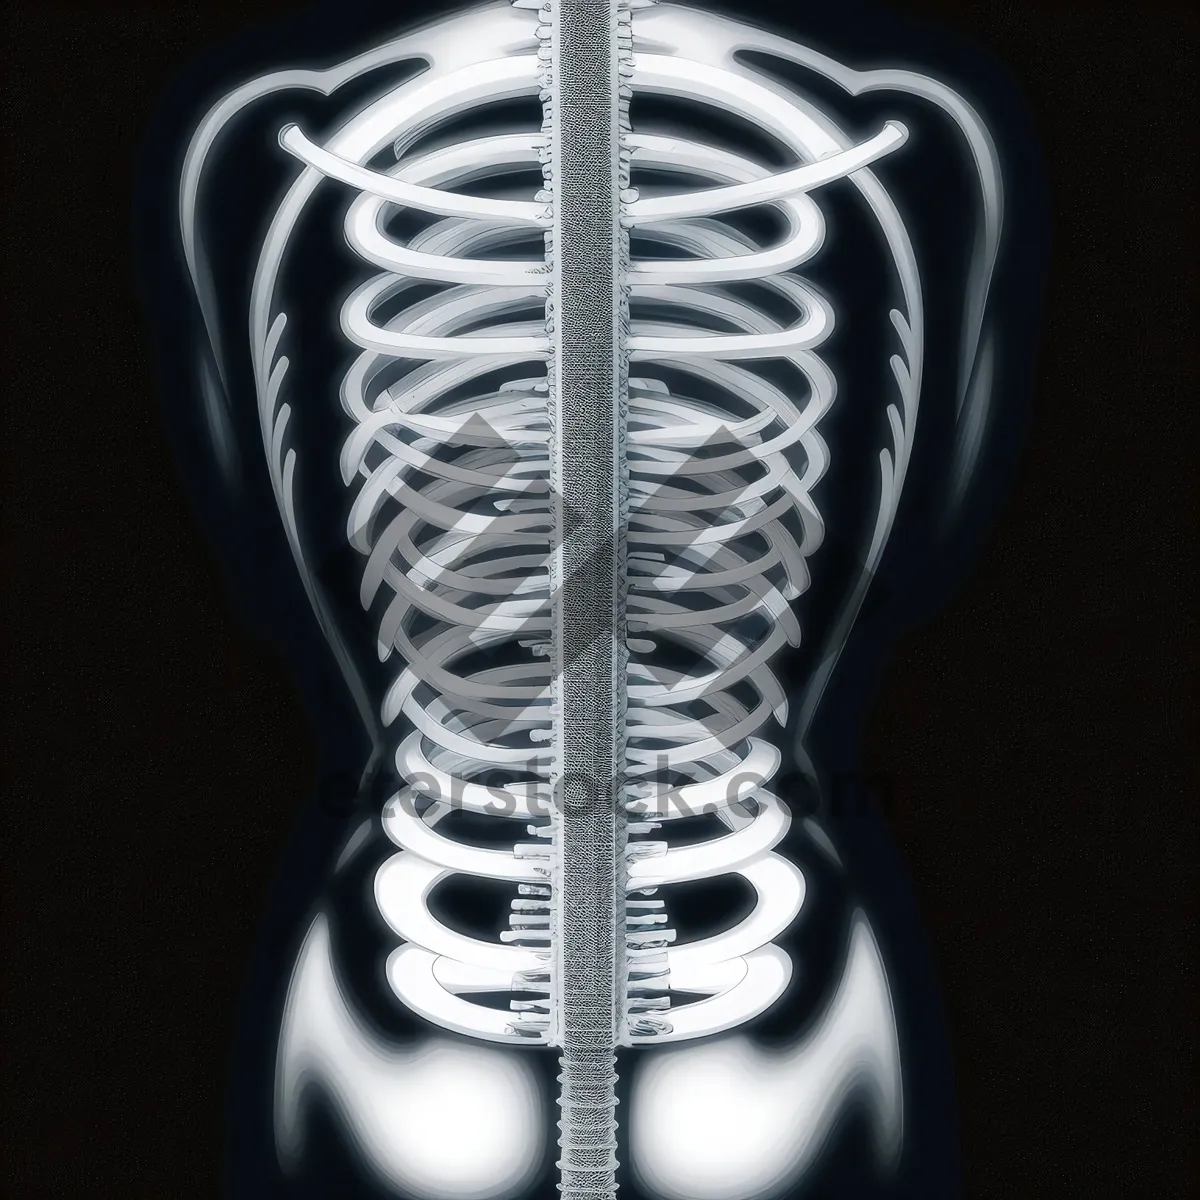 Picture of Anatomical Skeleton X-Ray: Human Spine & Skull